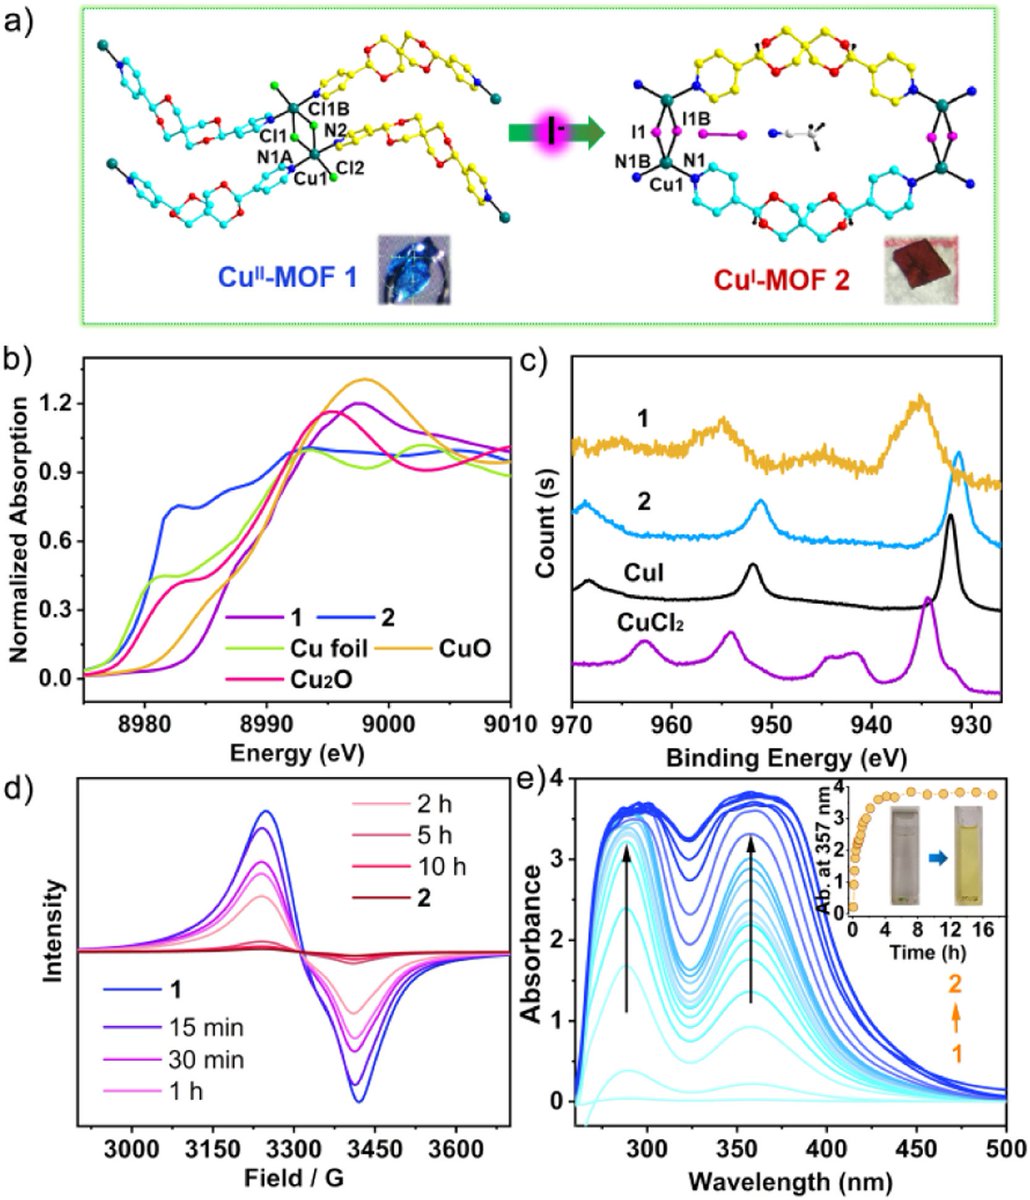 Design and fabrication of CuI/CuII-MOF-incorporated hydrogel photocatalysts for synergy removal of Cr(VI) and congo red @MOF_papers doi.org/10.1016/j.ccle…